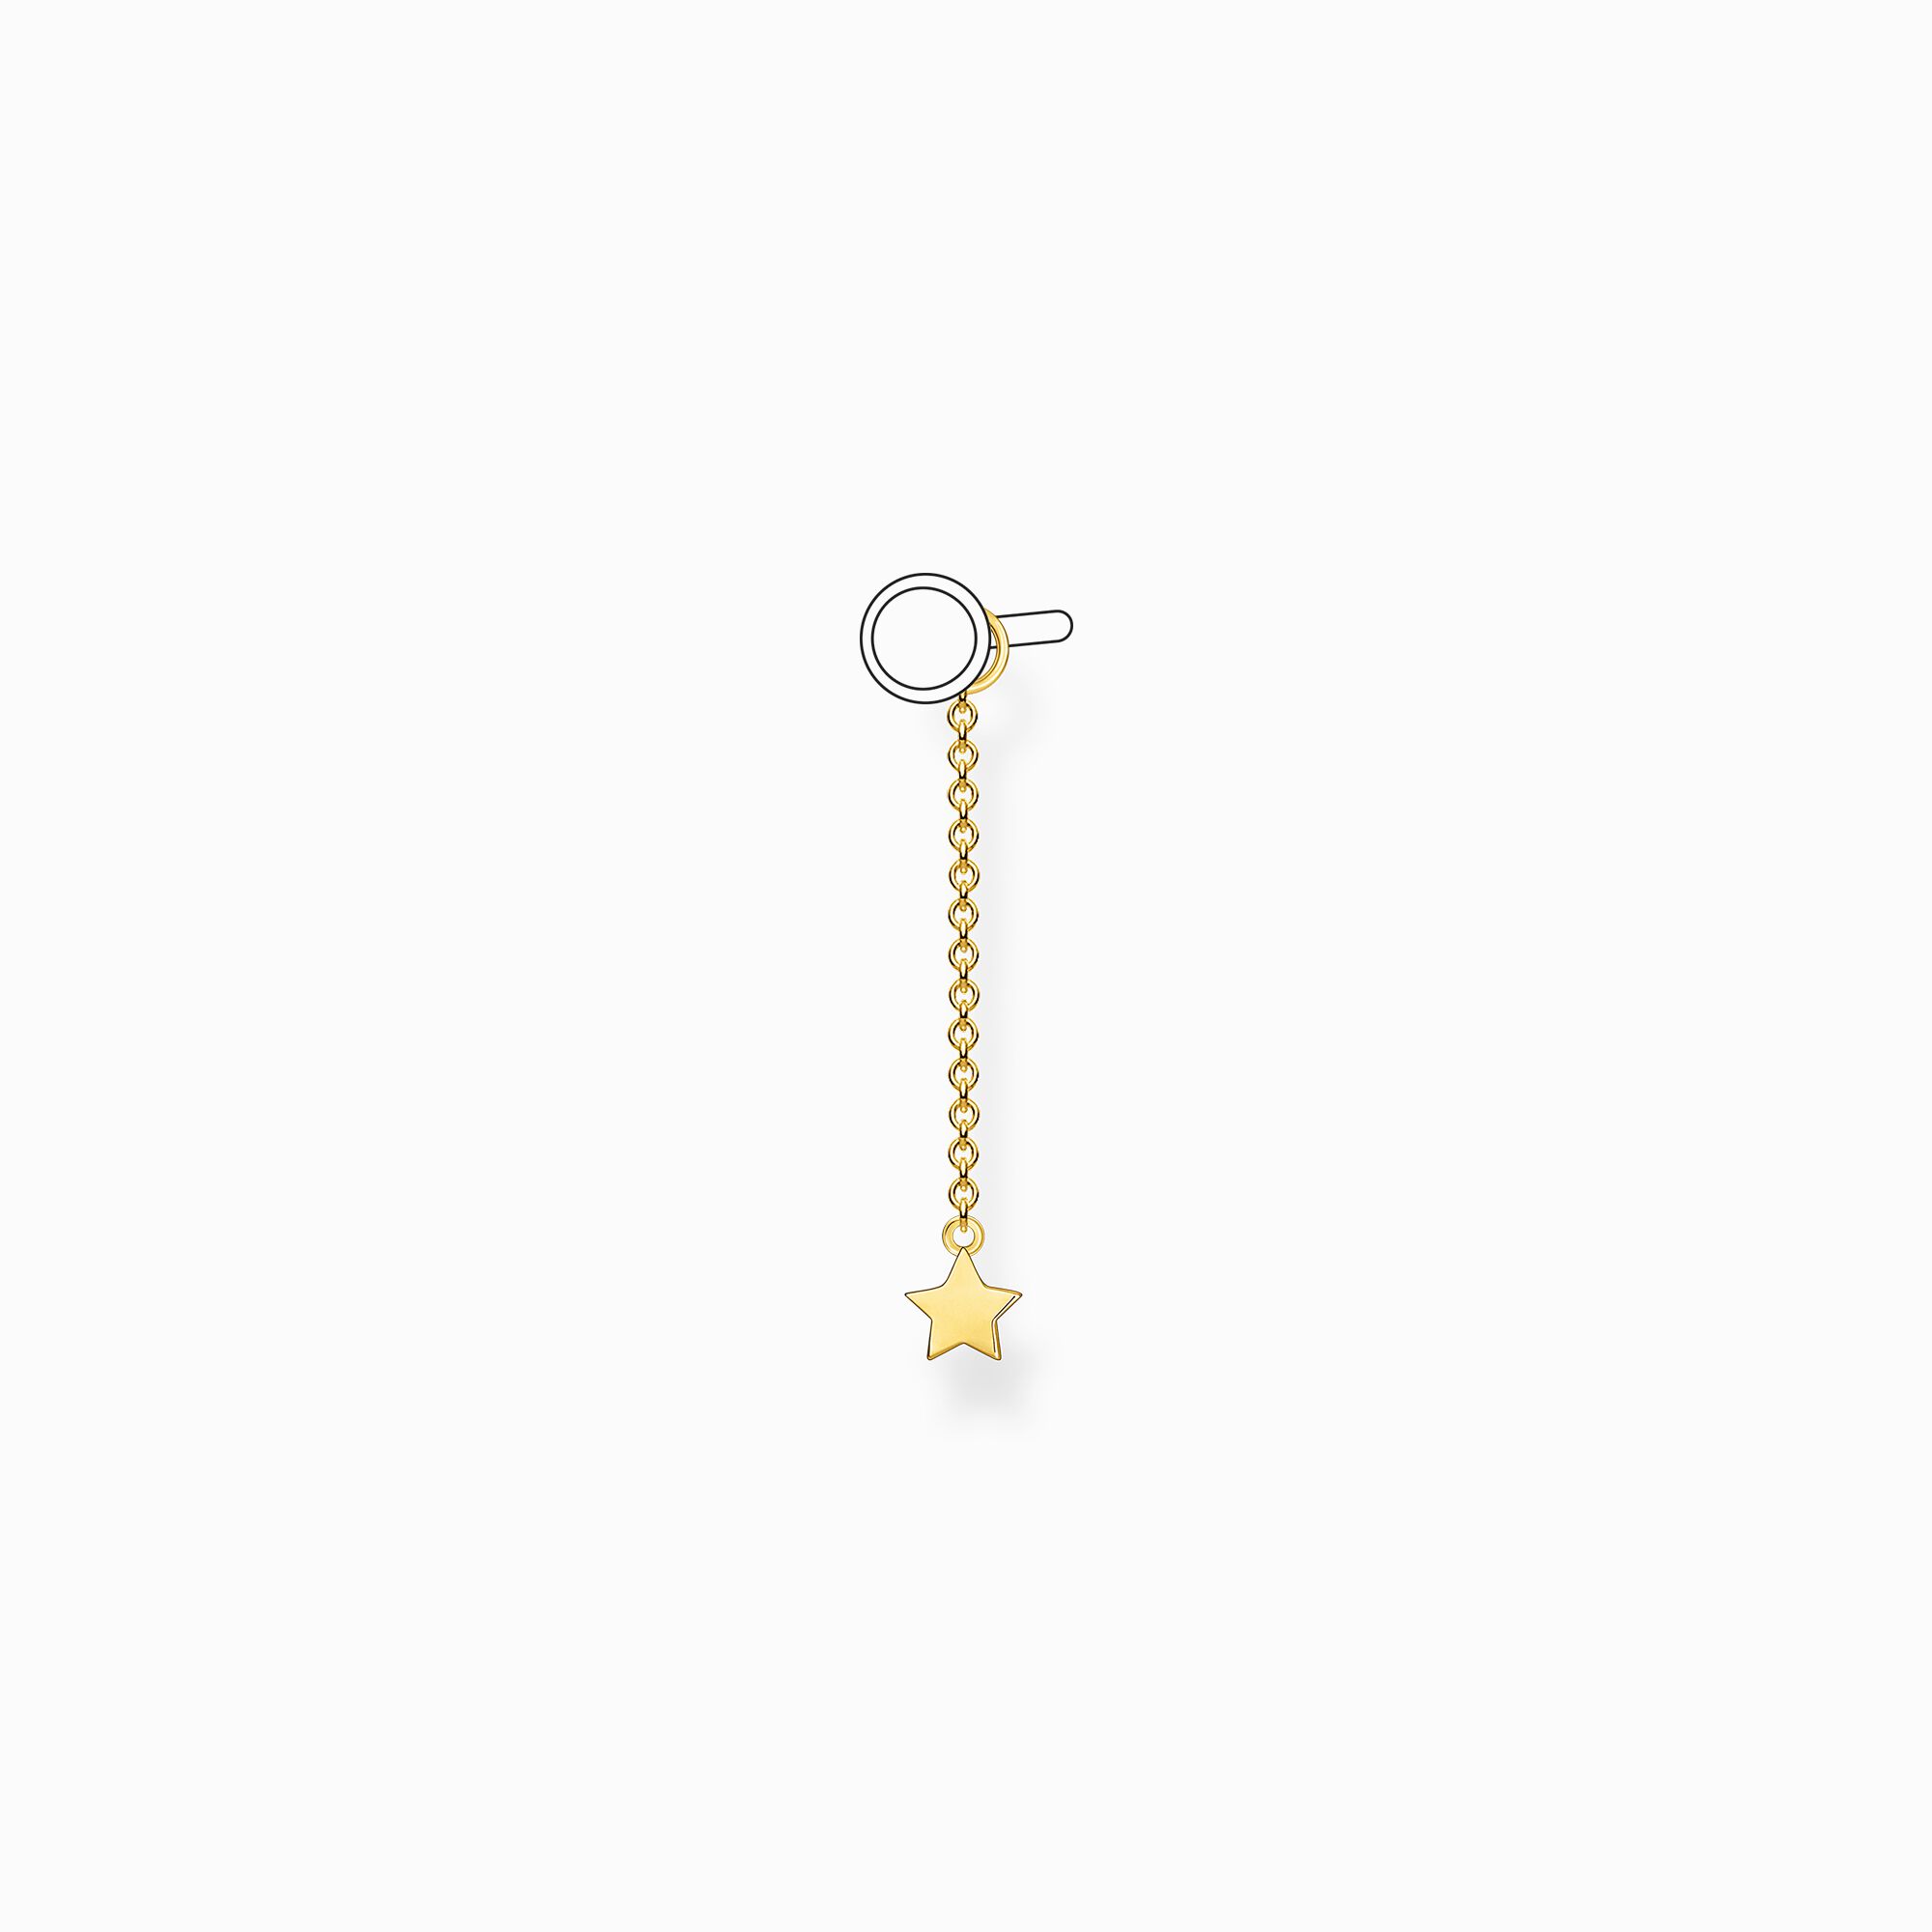 chain SABO earring pendant Golden – with THOMAS